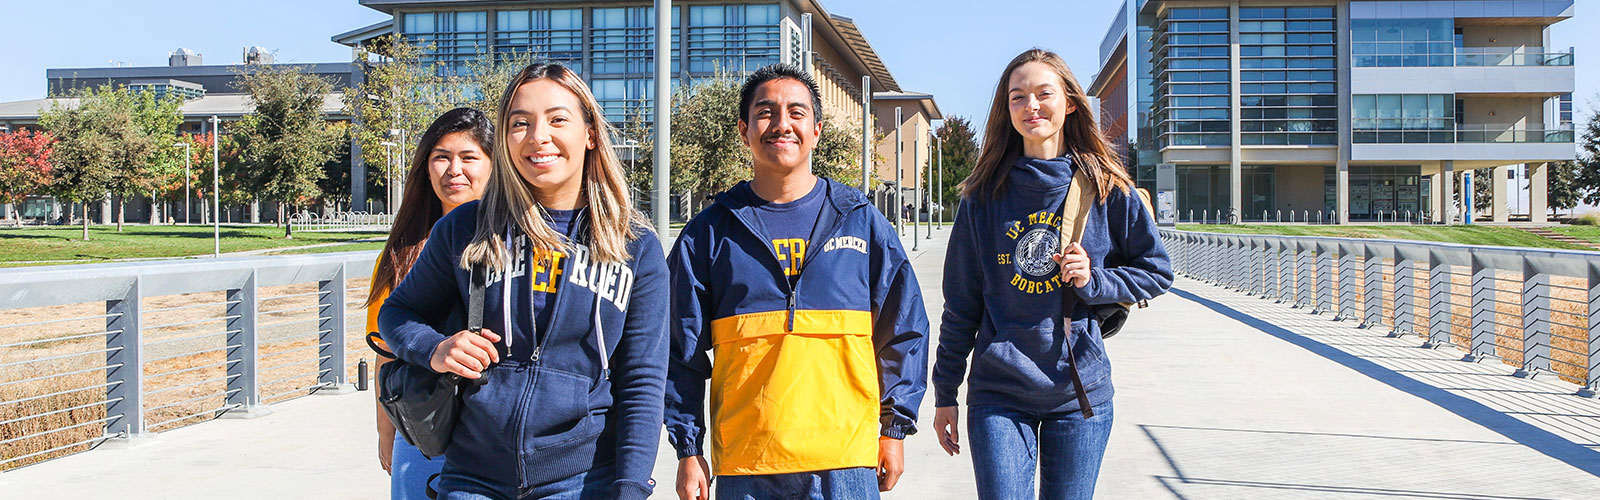 UC Merced colors page hero image